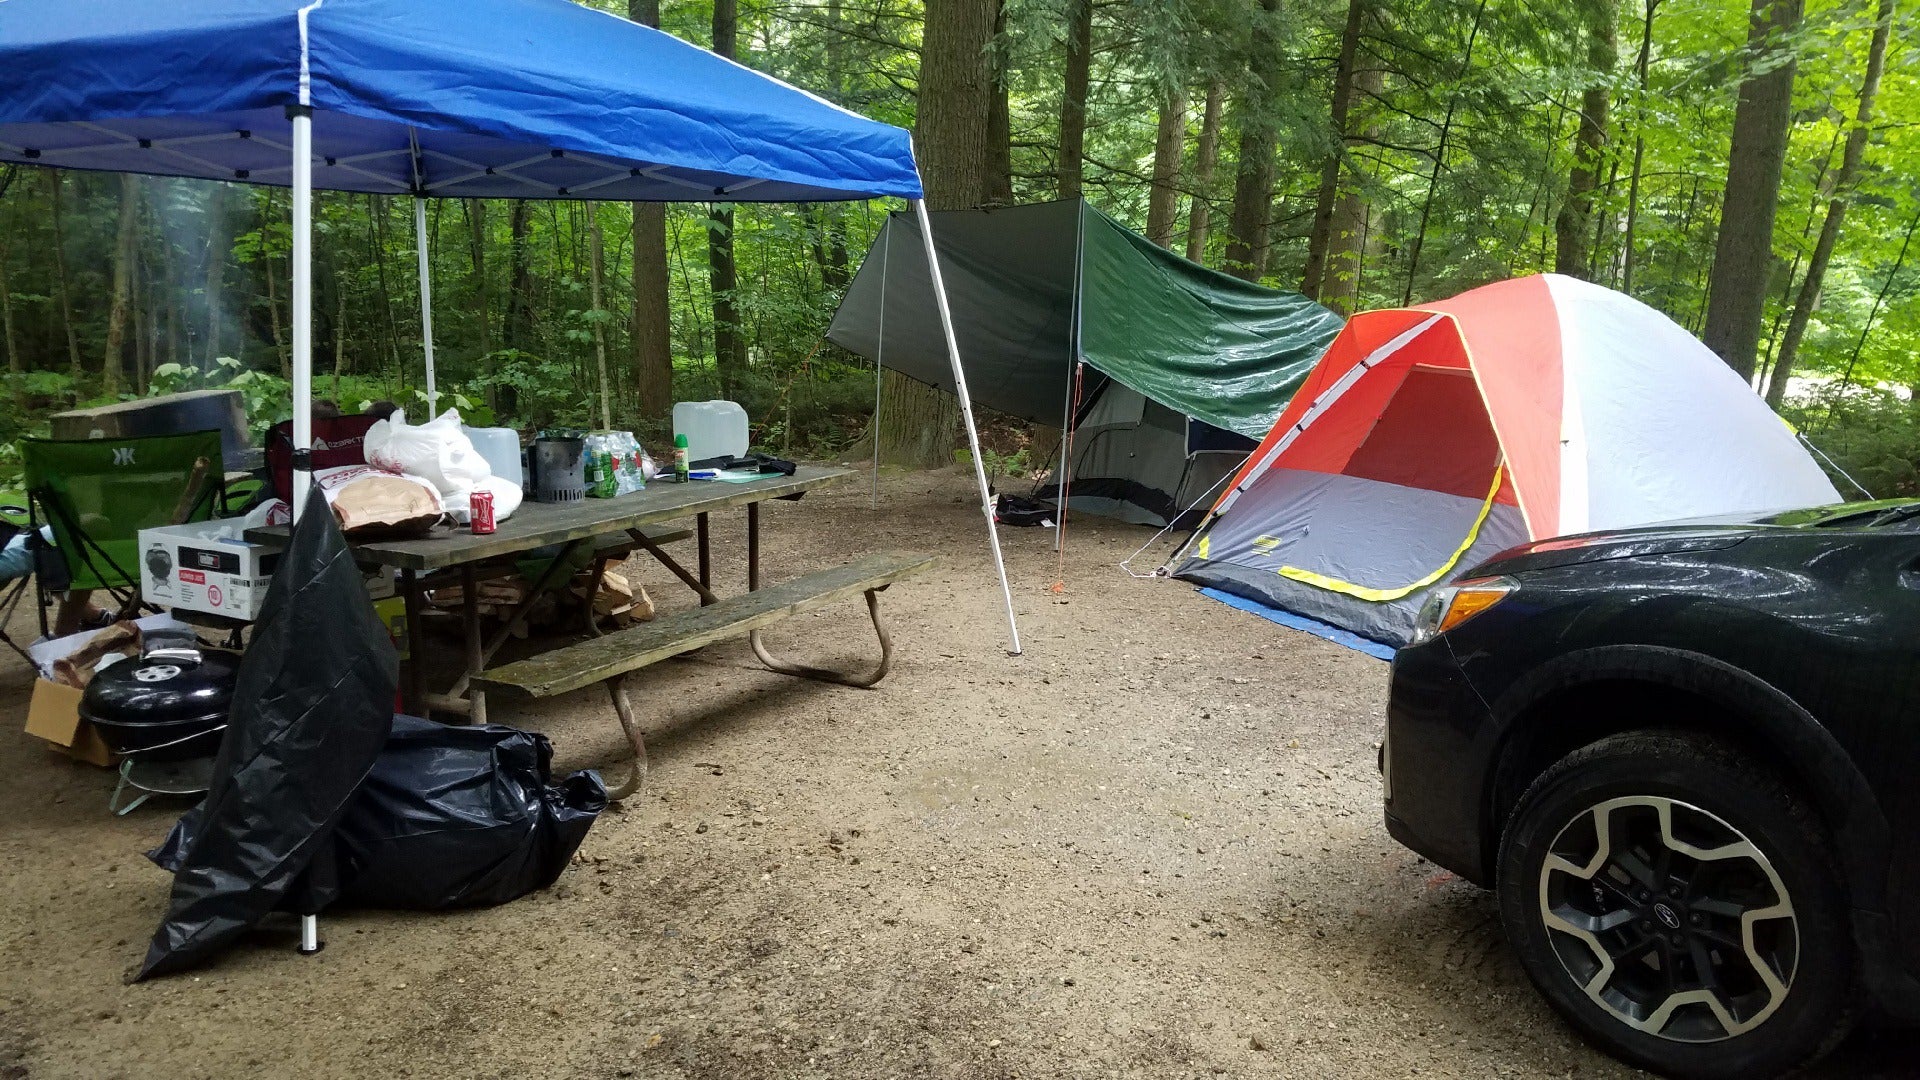 our campsite had ample space